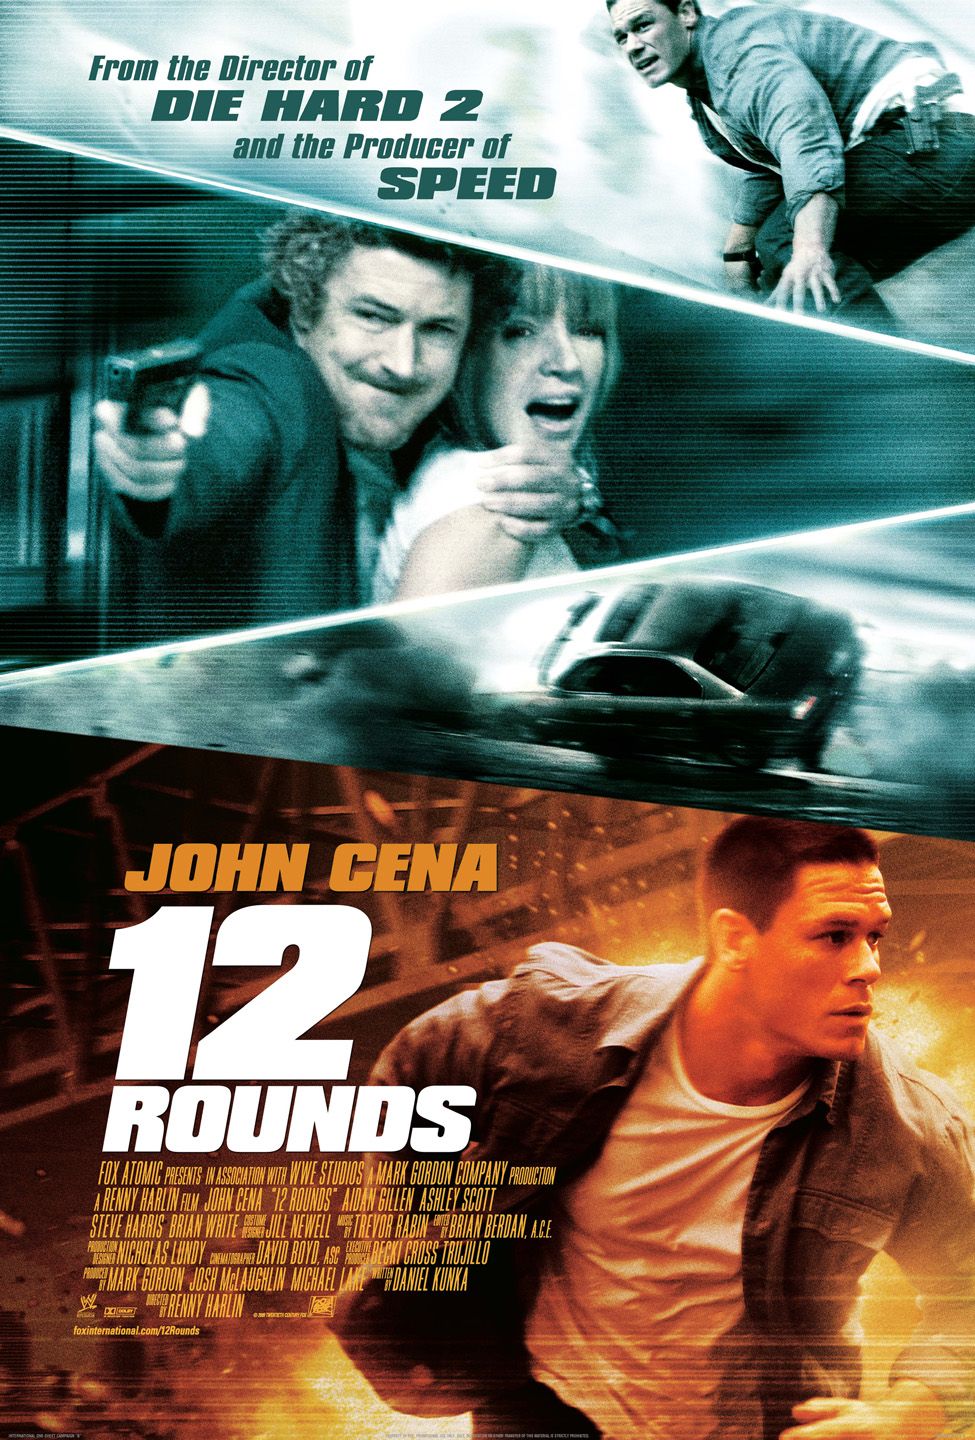 12 ROUNDS (2010) – The Movie Spoiler